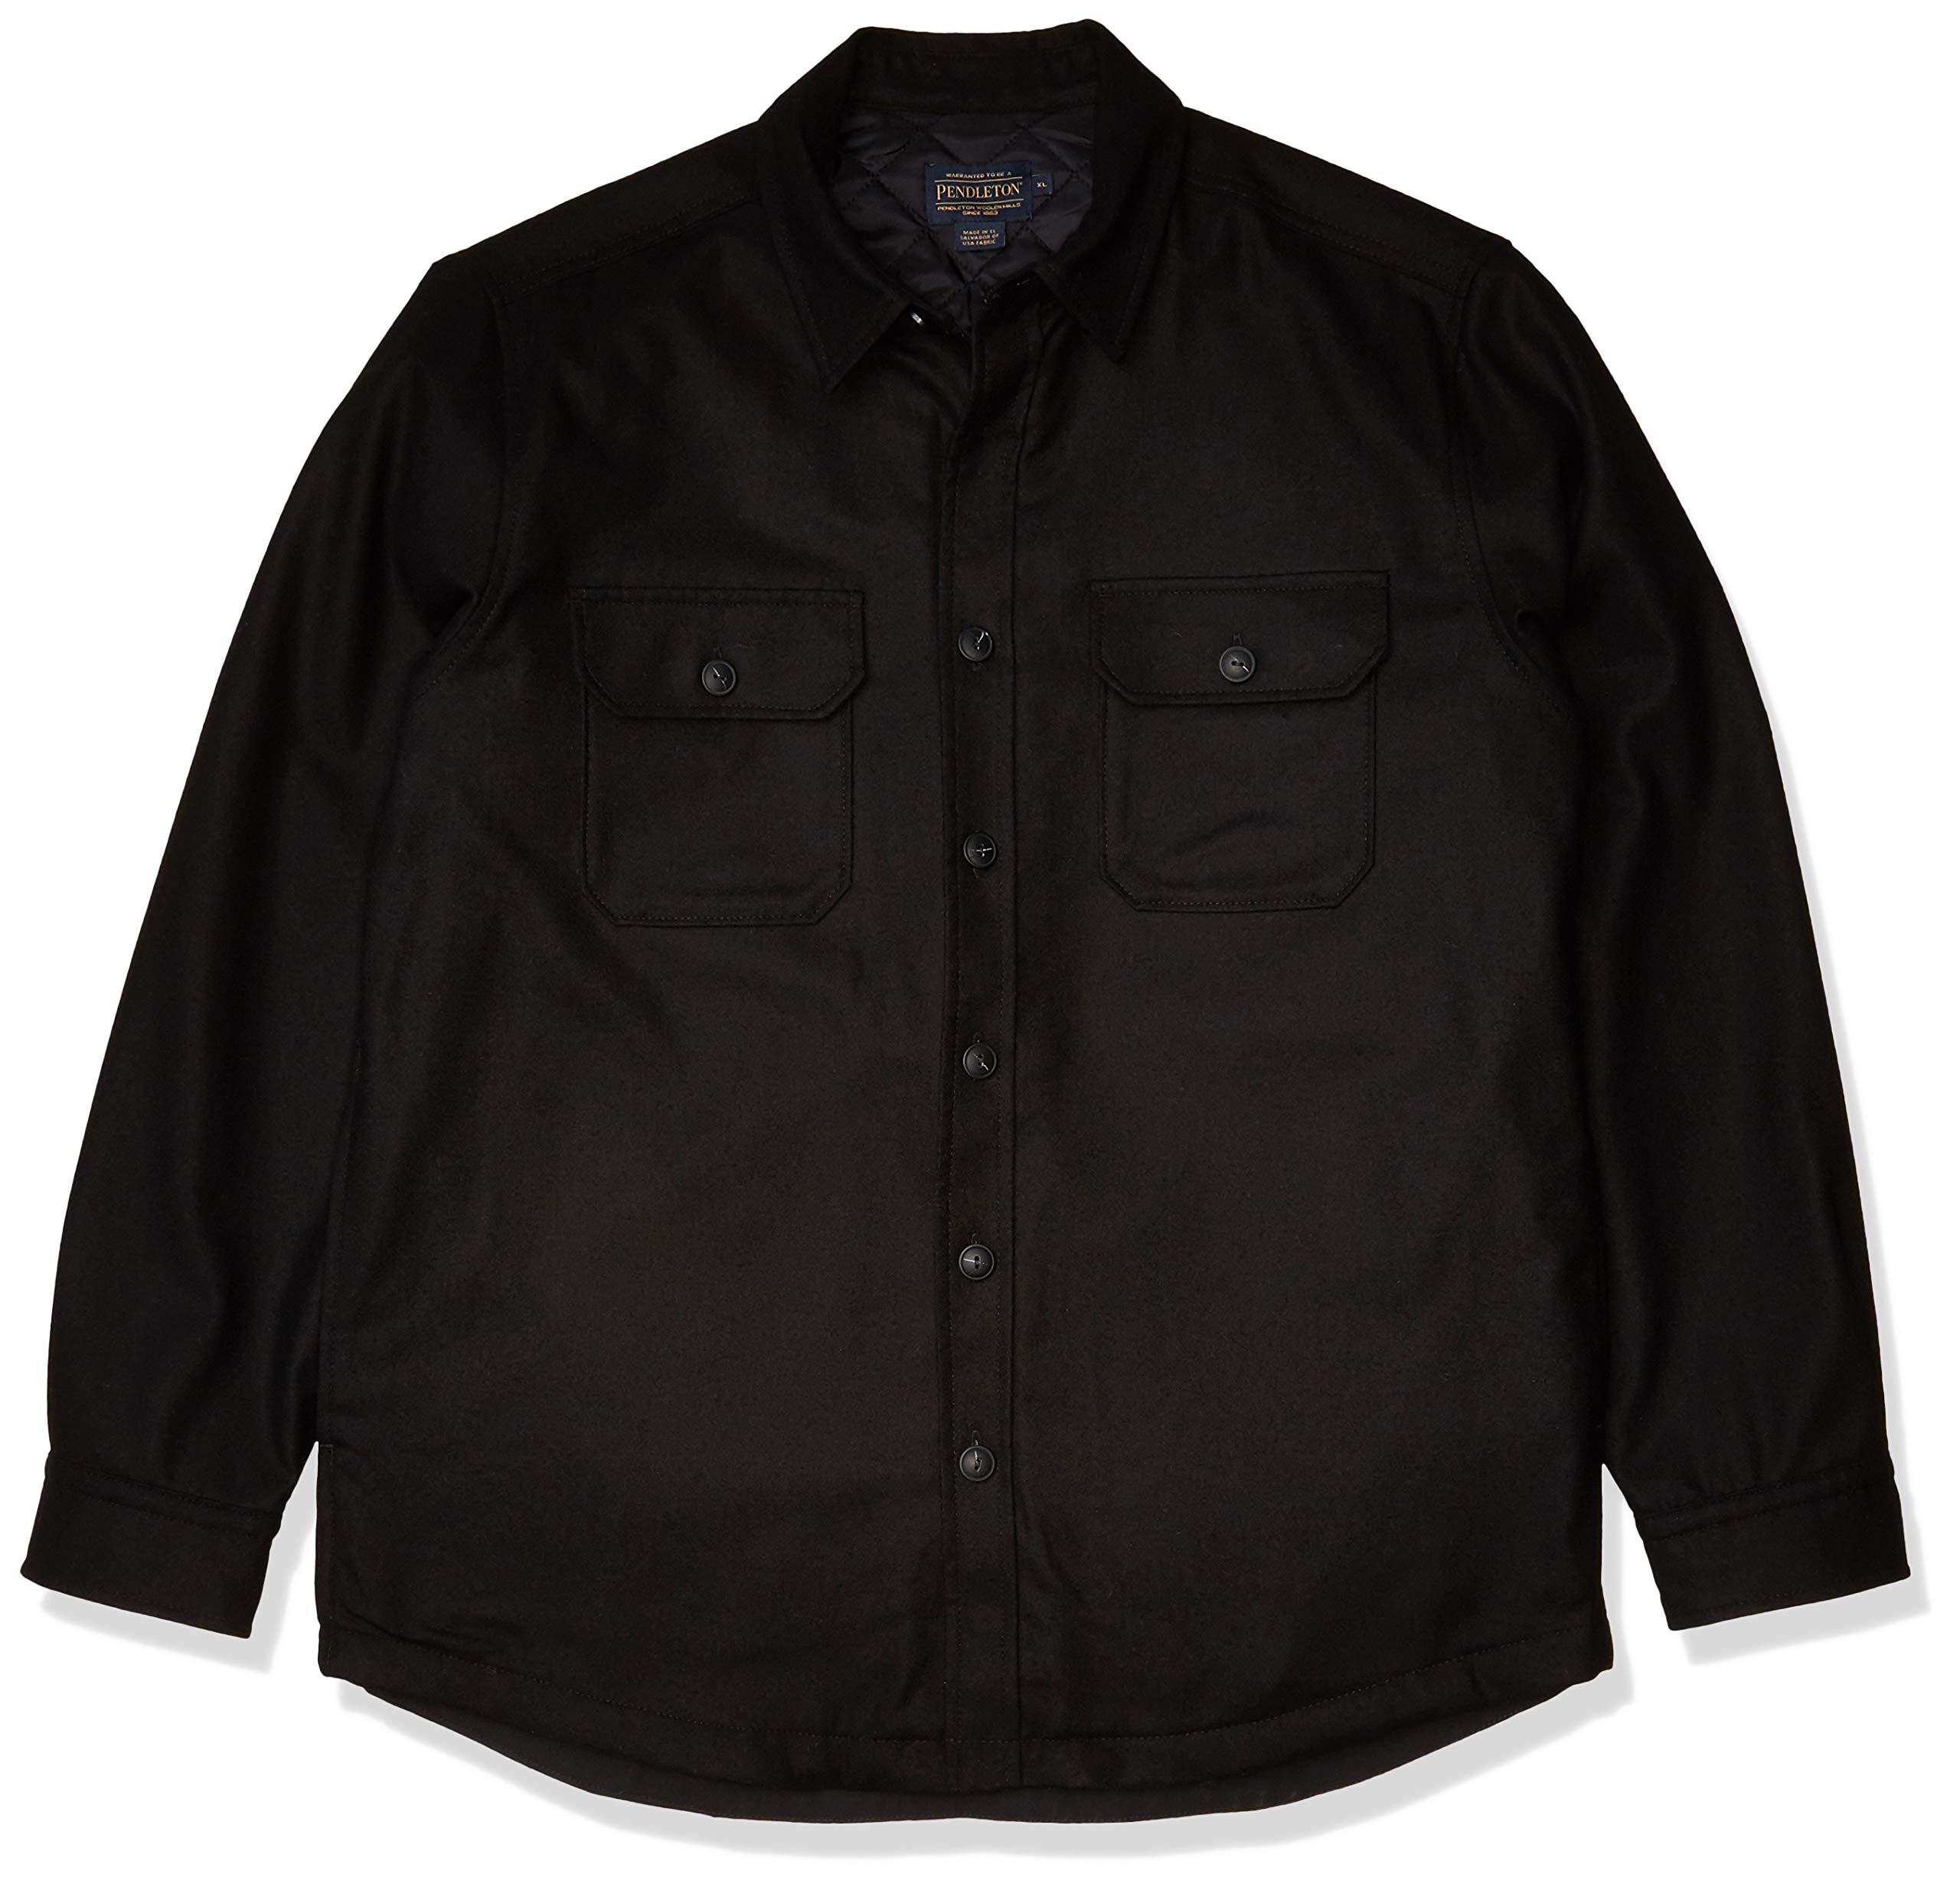 Pendleton Quilted Cpo In Wool Shirt Jacket in Black for Men - Lyst